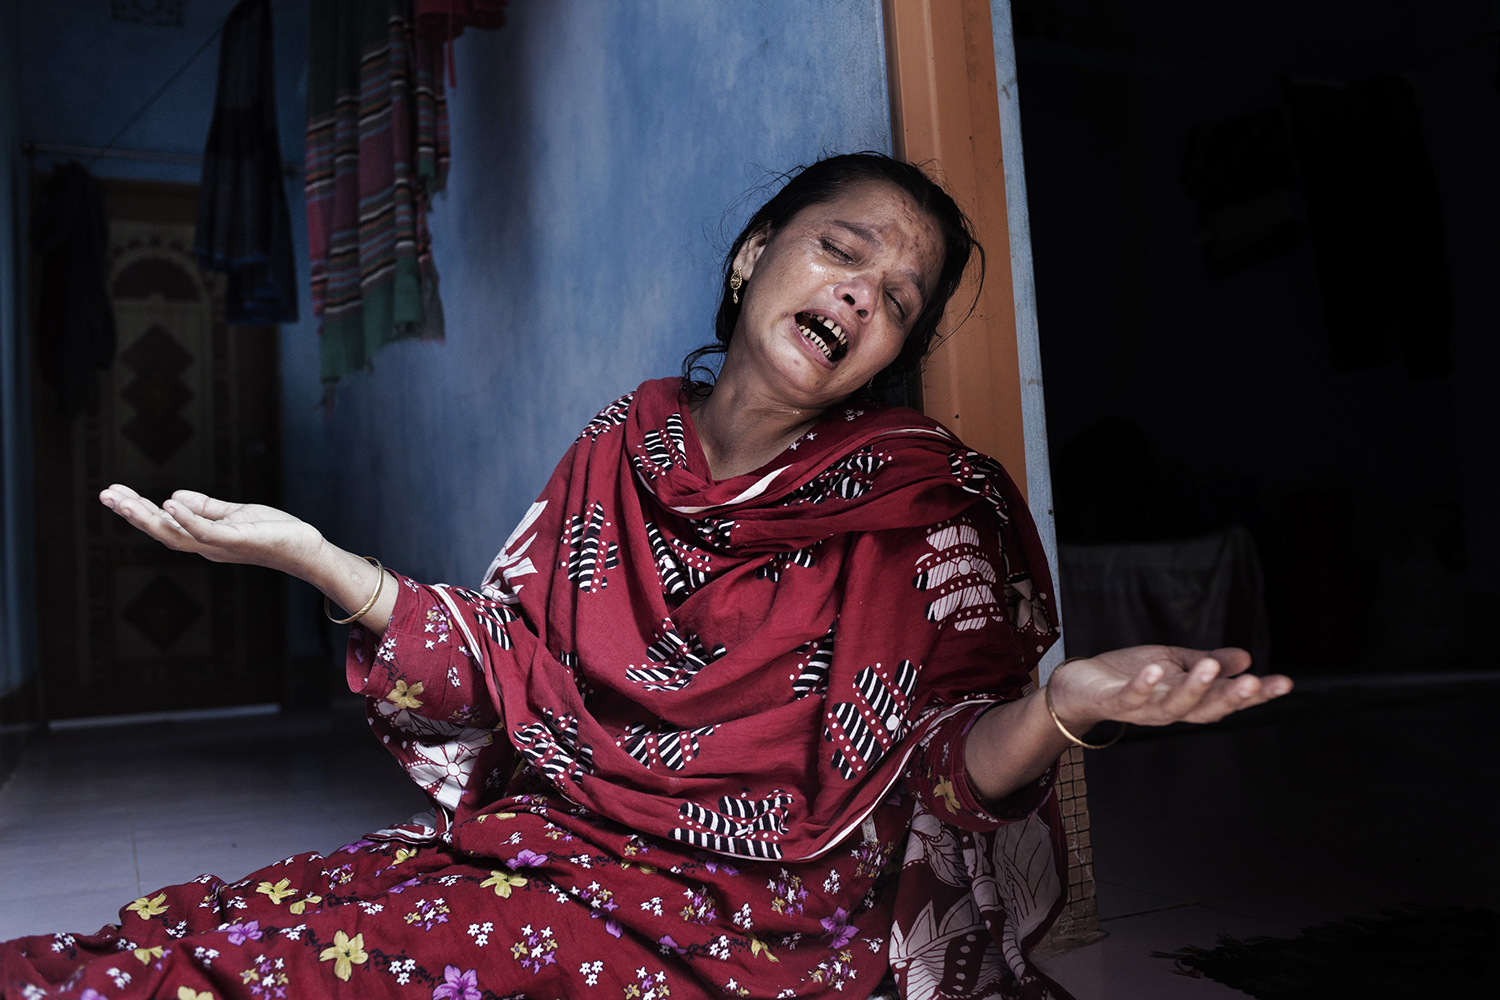 June 1, 2013. The mother of missing worker Suroj weeping over the loss of her son, Dhaka, Bangladesh.